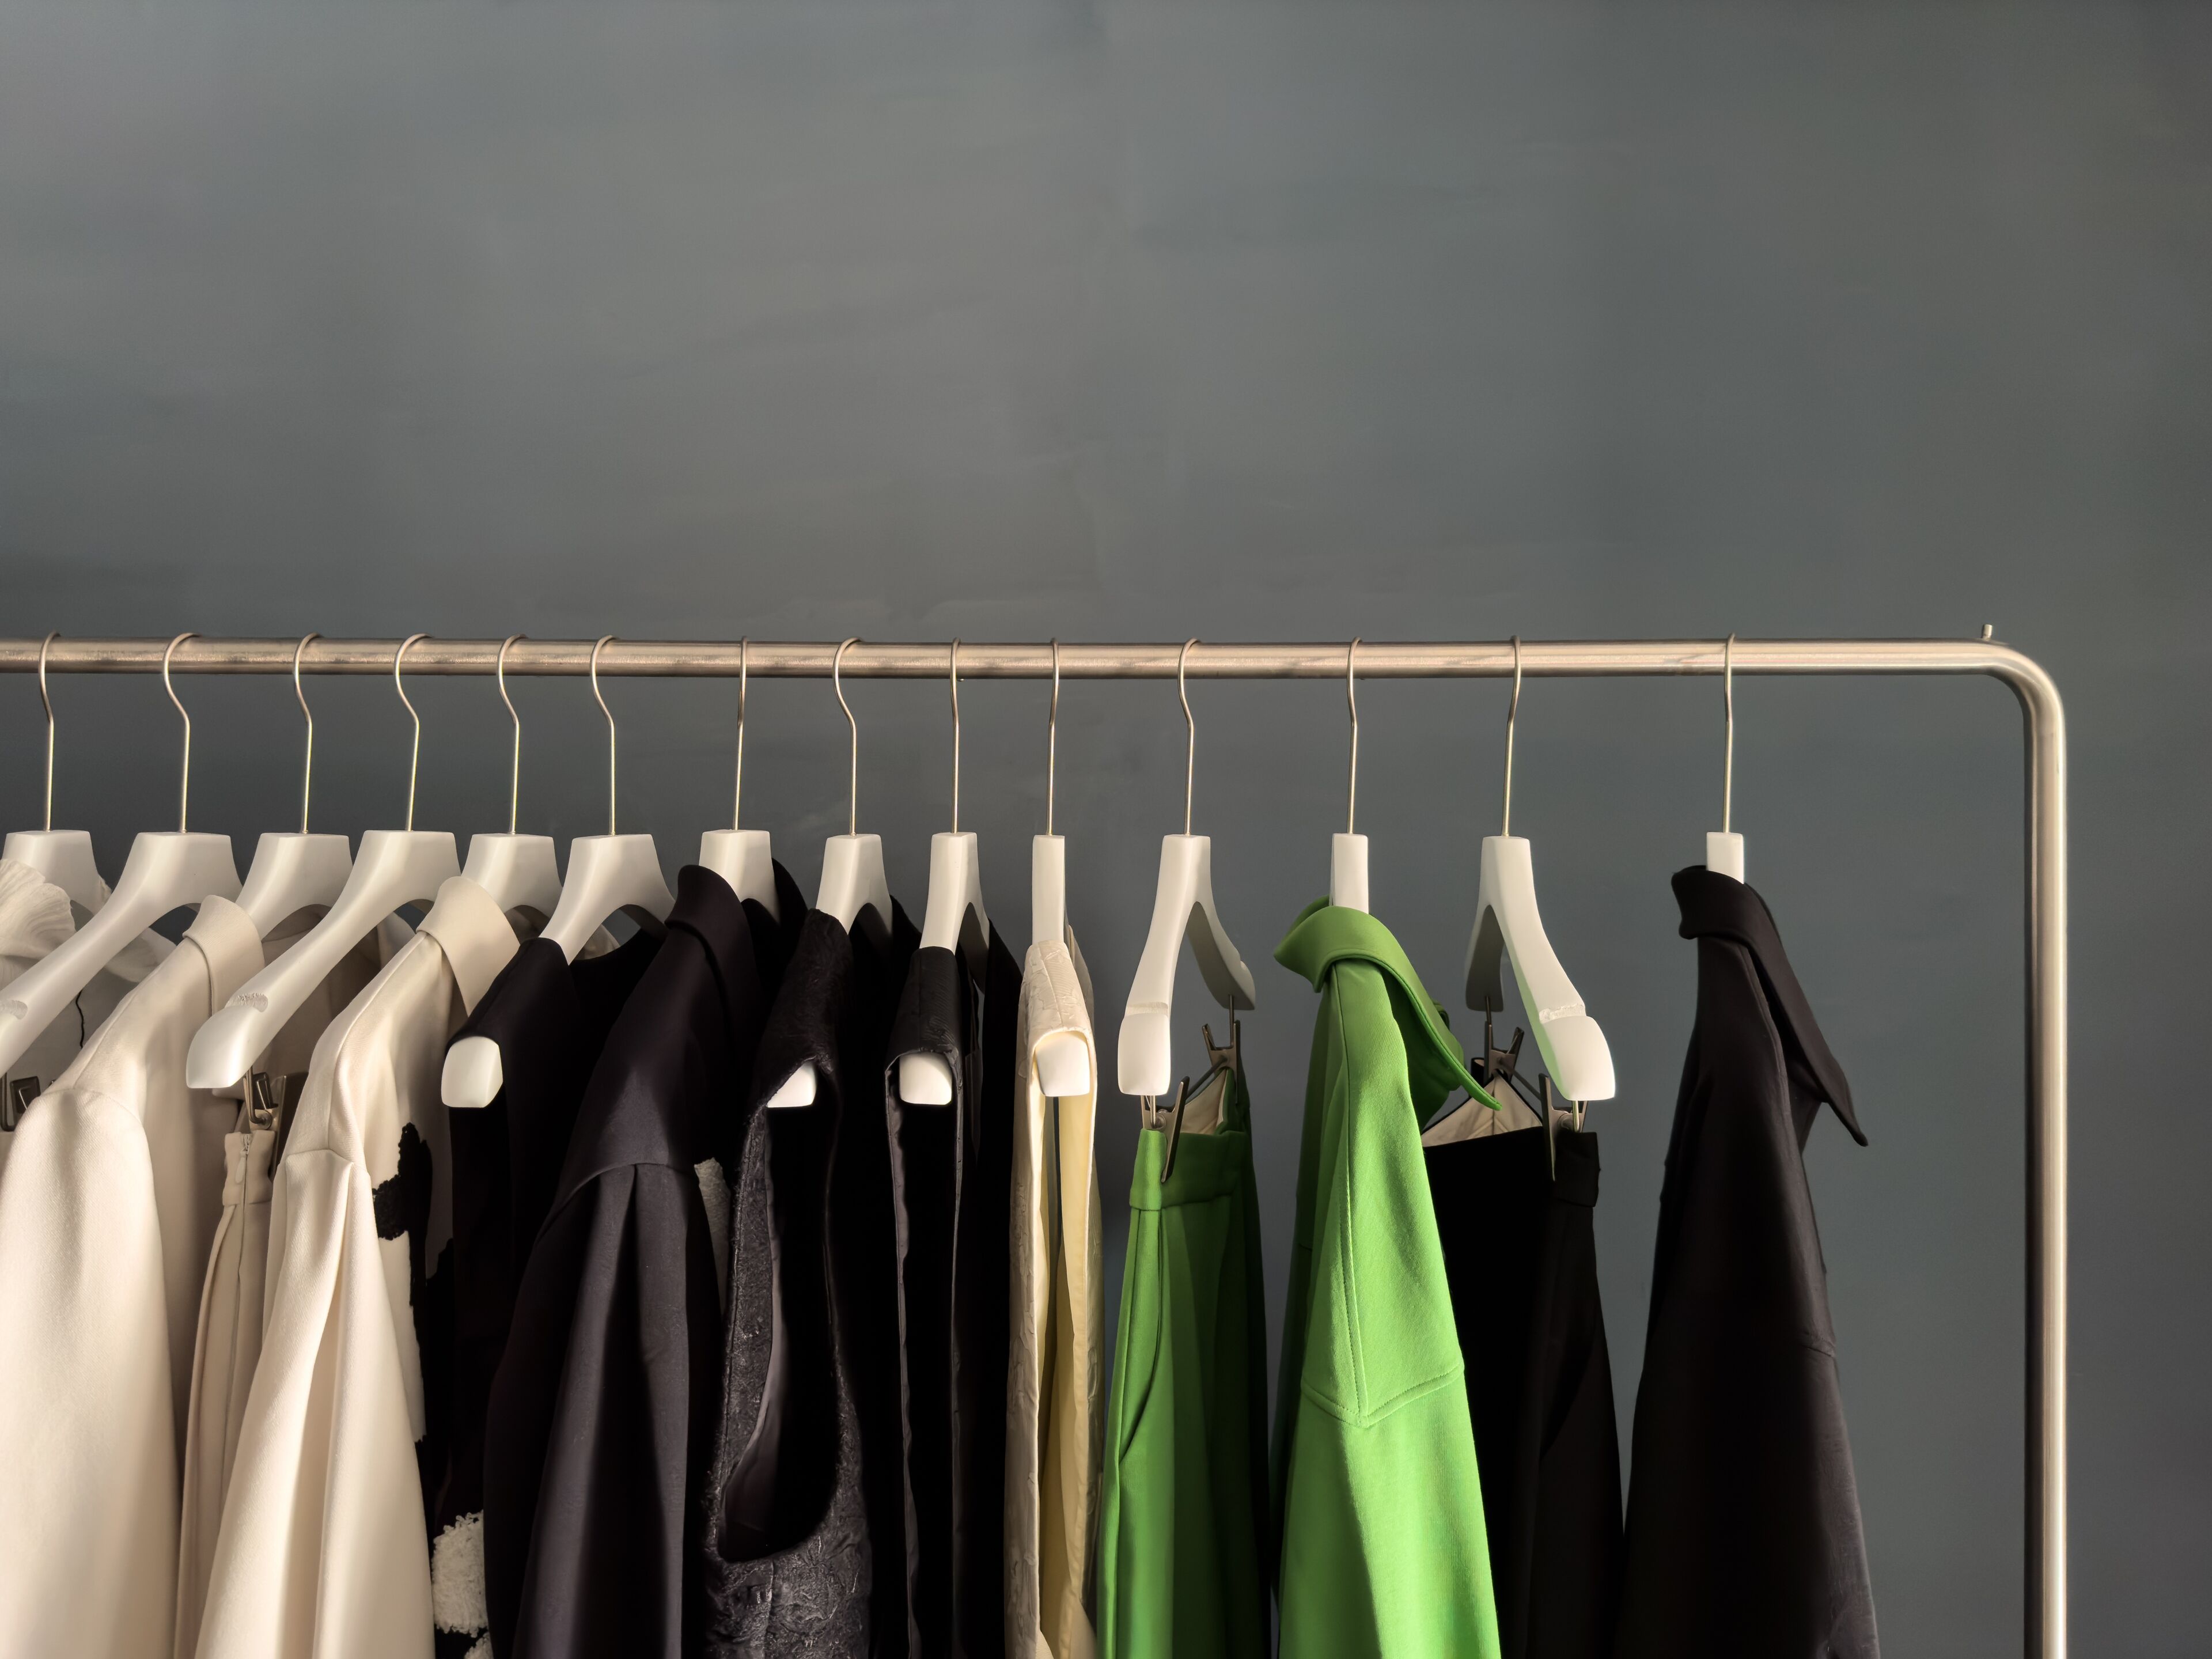 A collection of various garments in neutral tones with a striking green piece, displayed on a metal rack against a grey background.